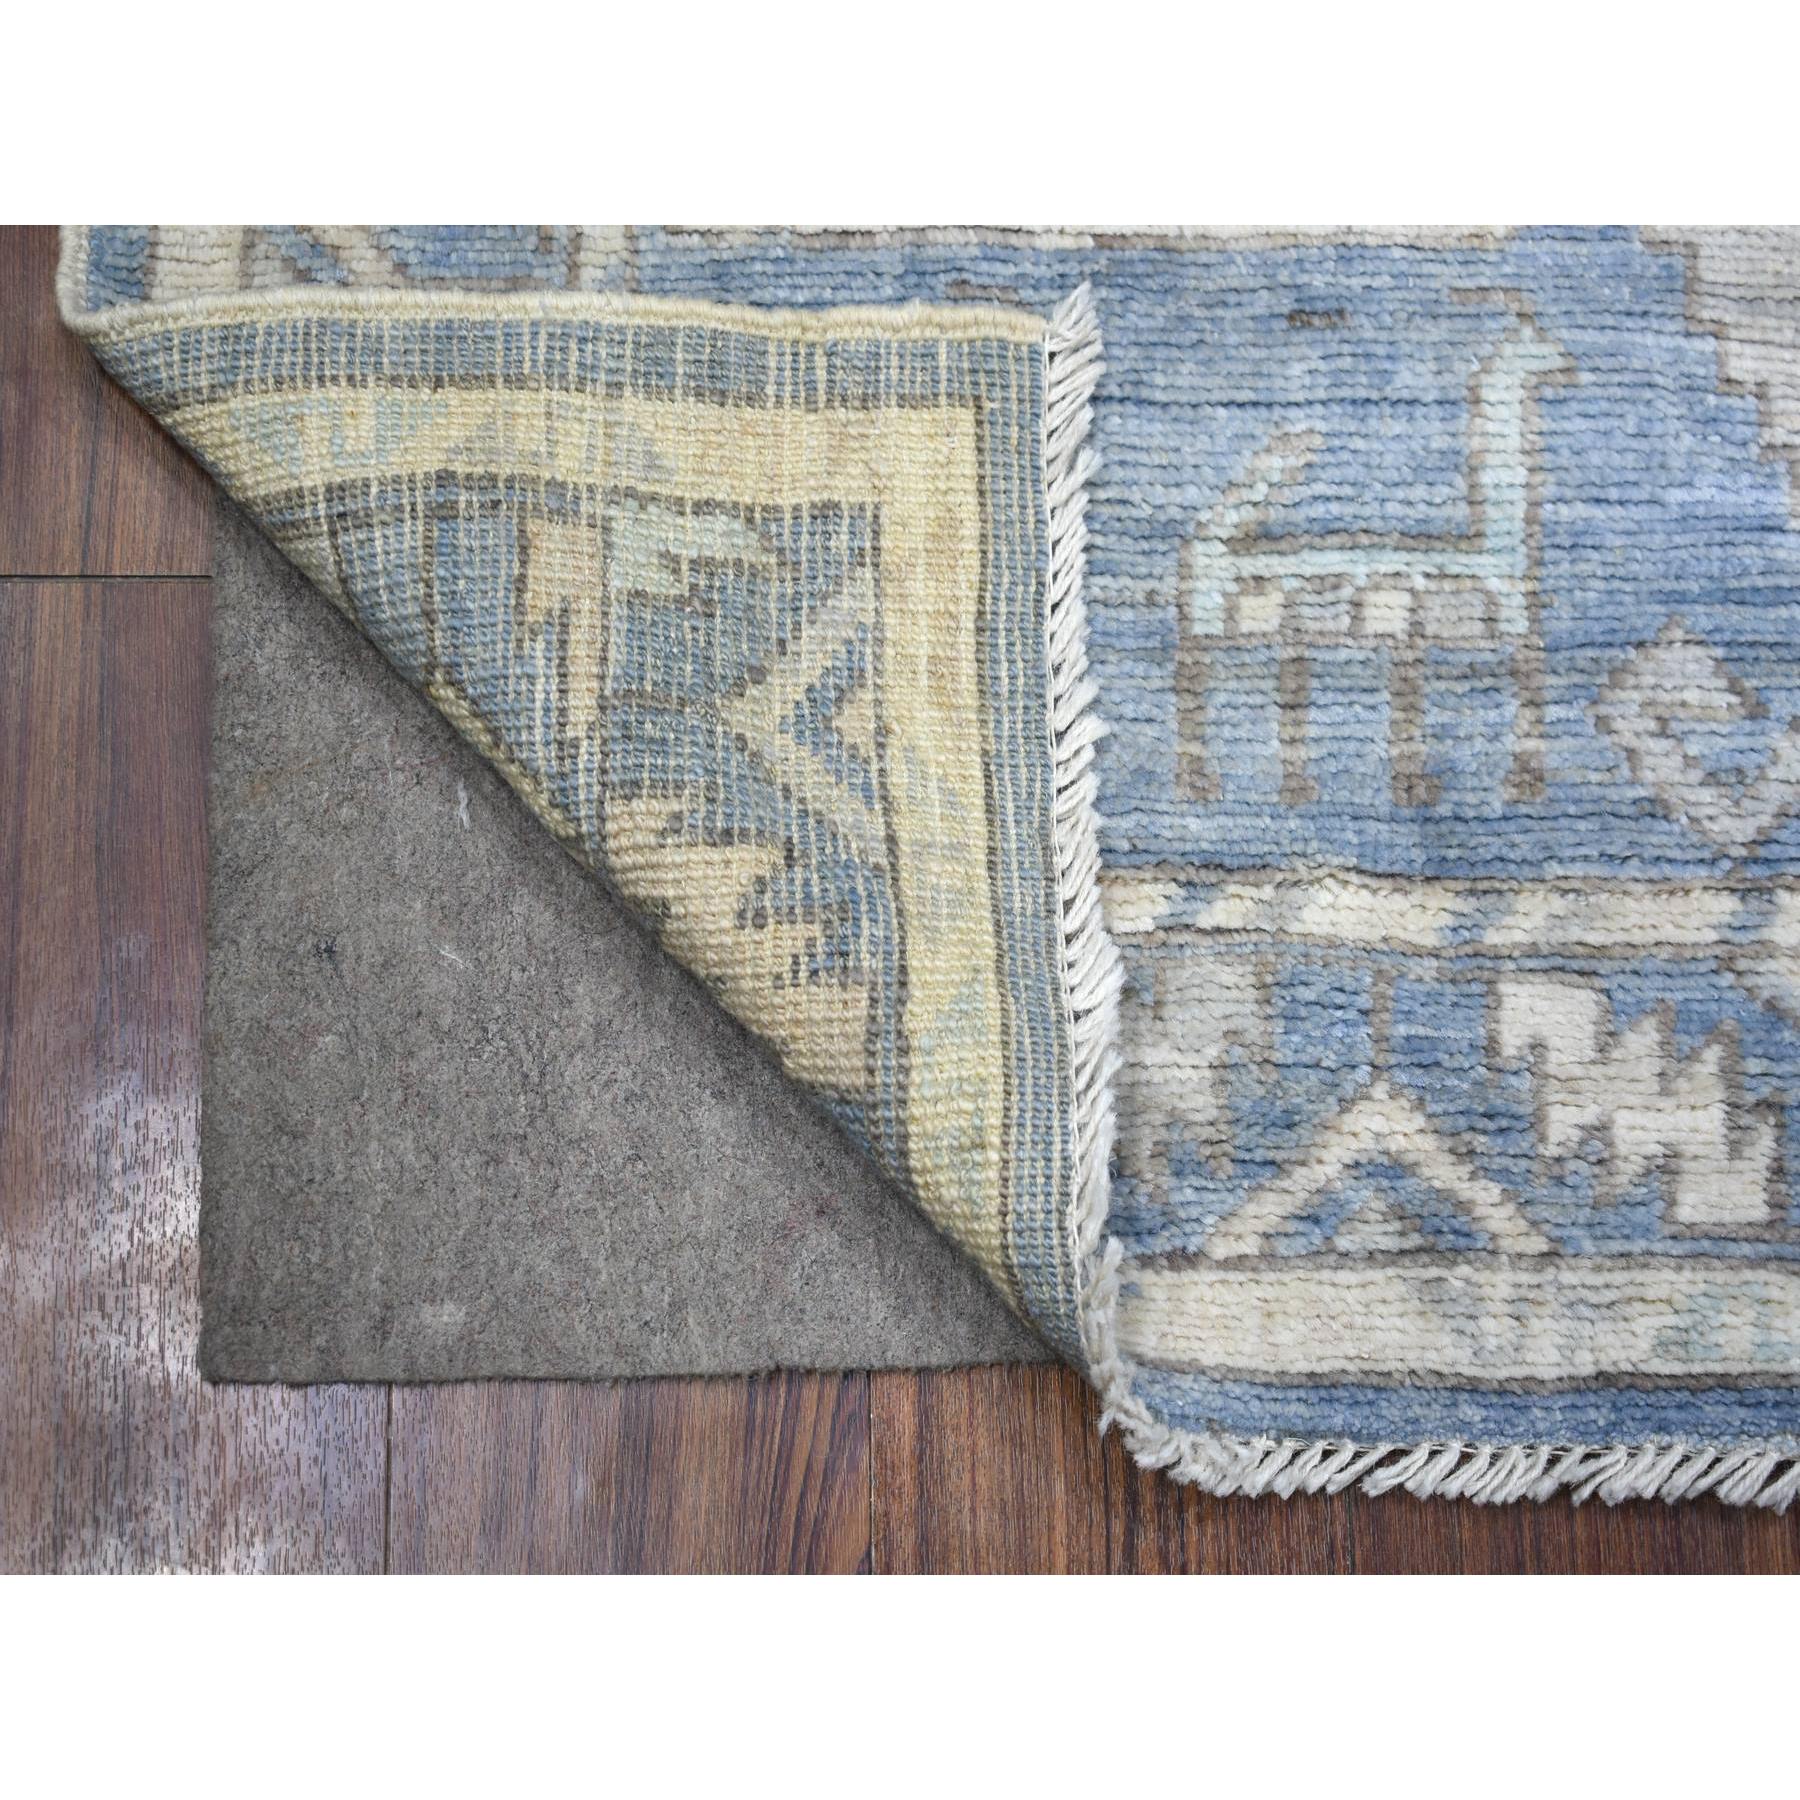 3'10"x8'8" Light Blue, Hand Woven Anatolian Village Inspired Geometric Medallion Design with Animal Figurines, Natural Dyes Pure Wool, Wide Runner Oriental Rug 